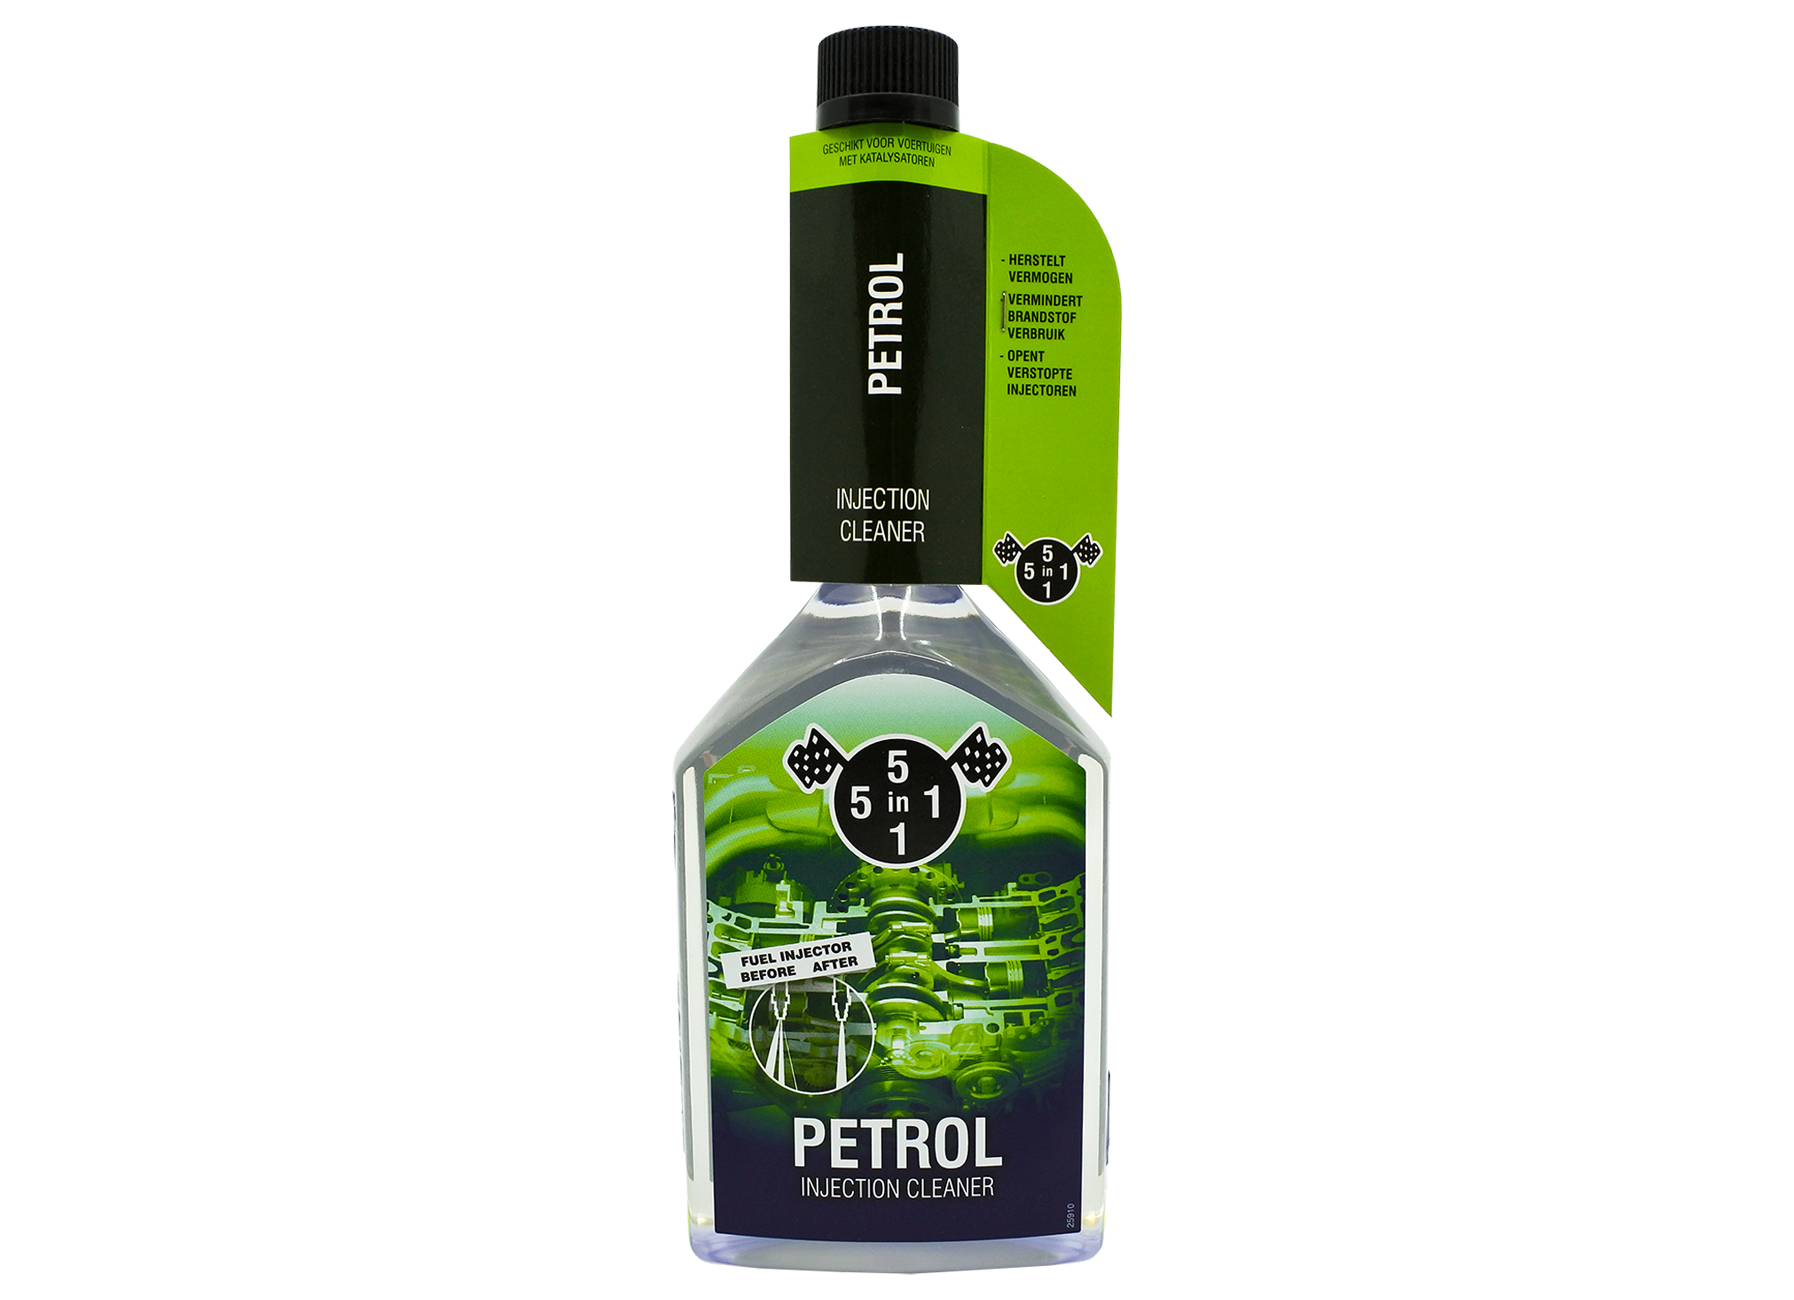 PETROL INJECTION CLEANER 5 IN 1 310ML